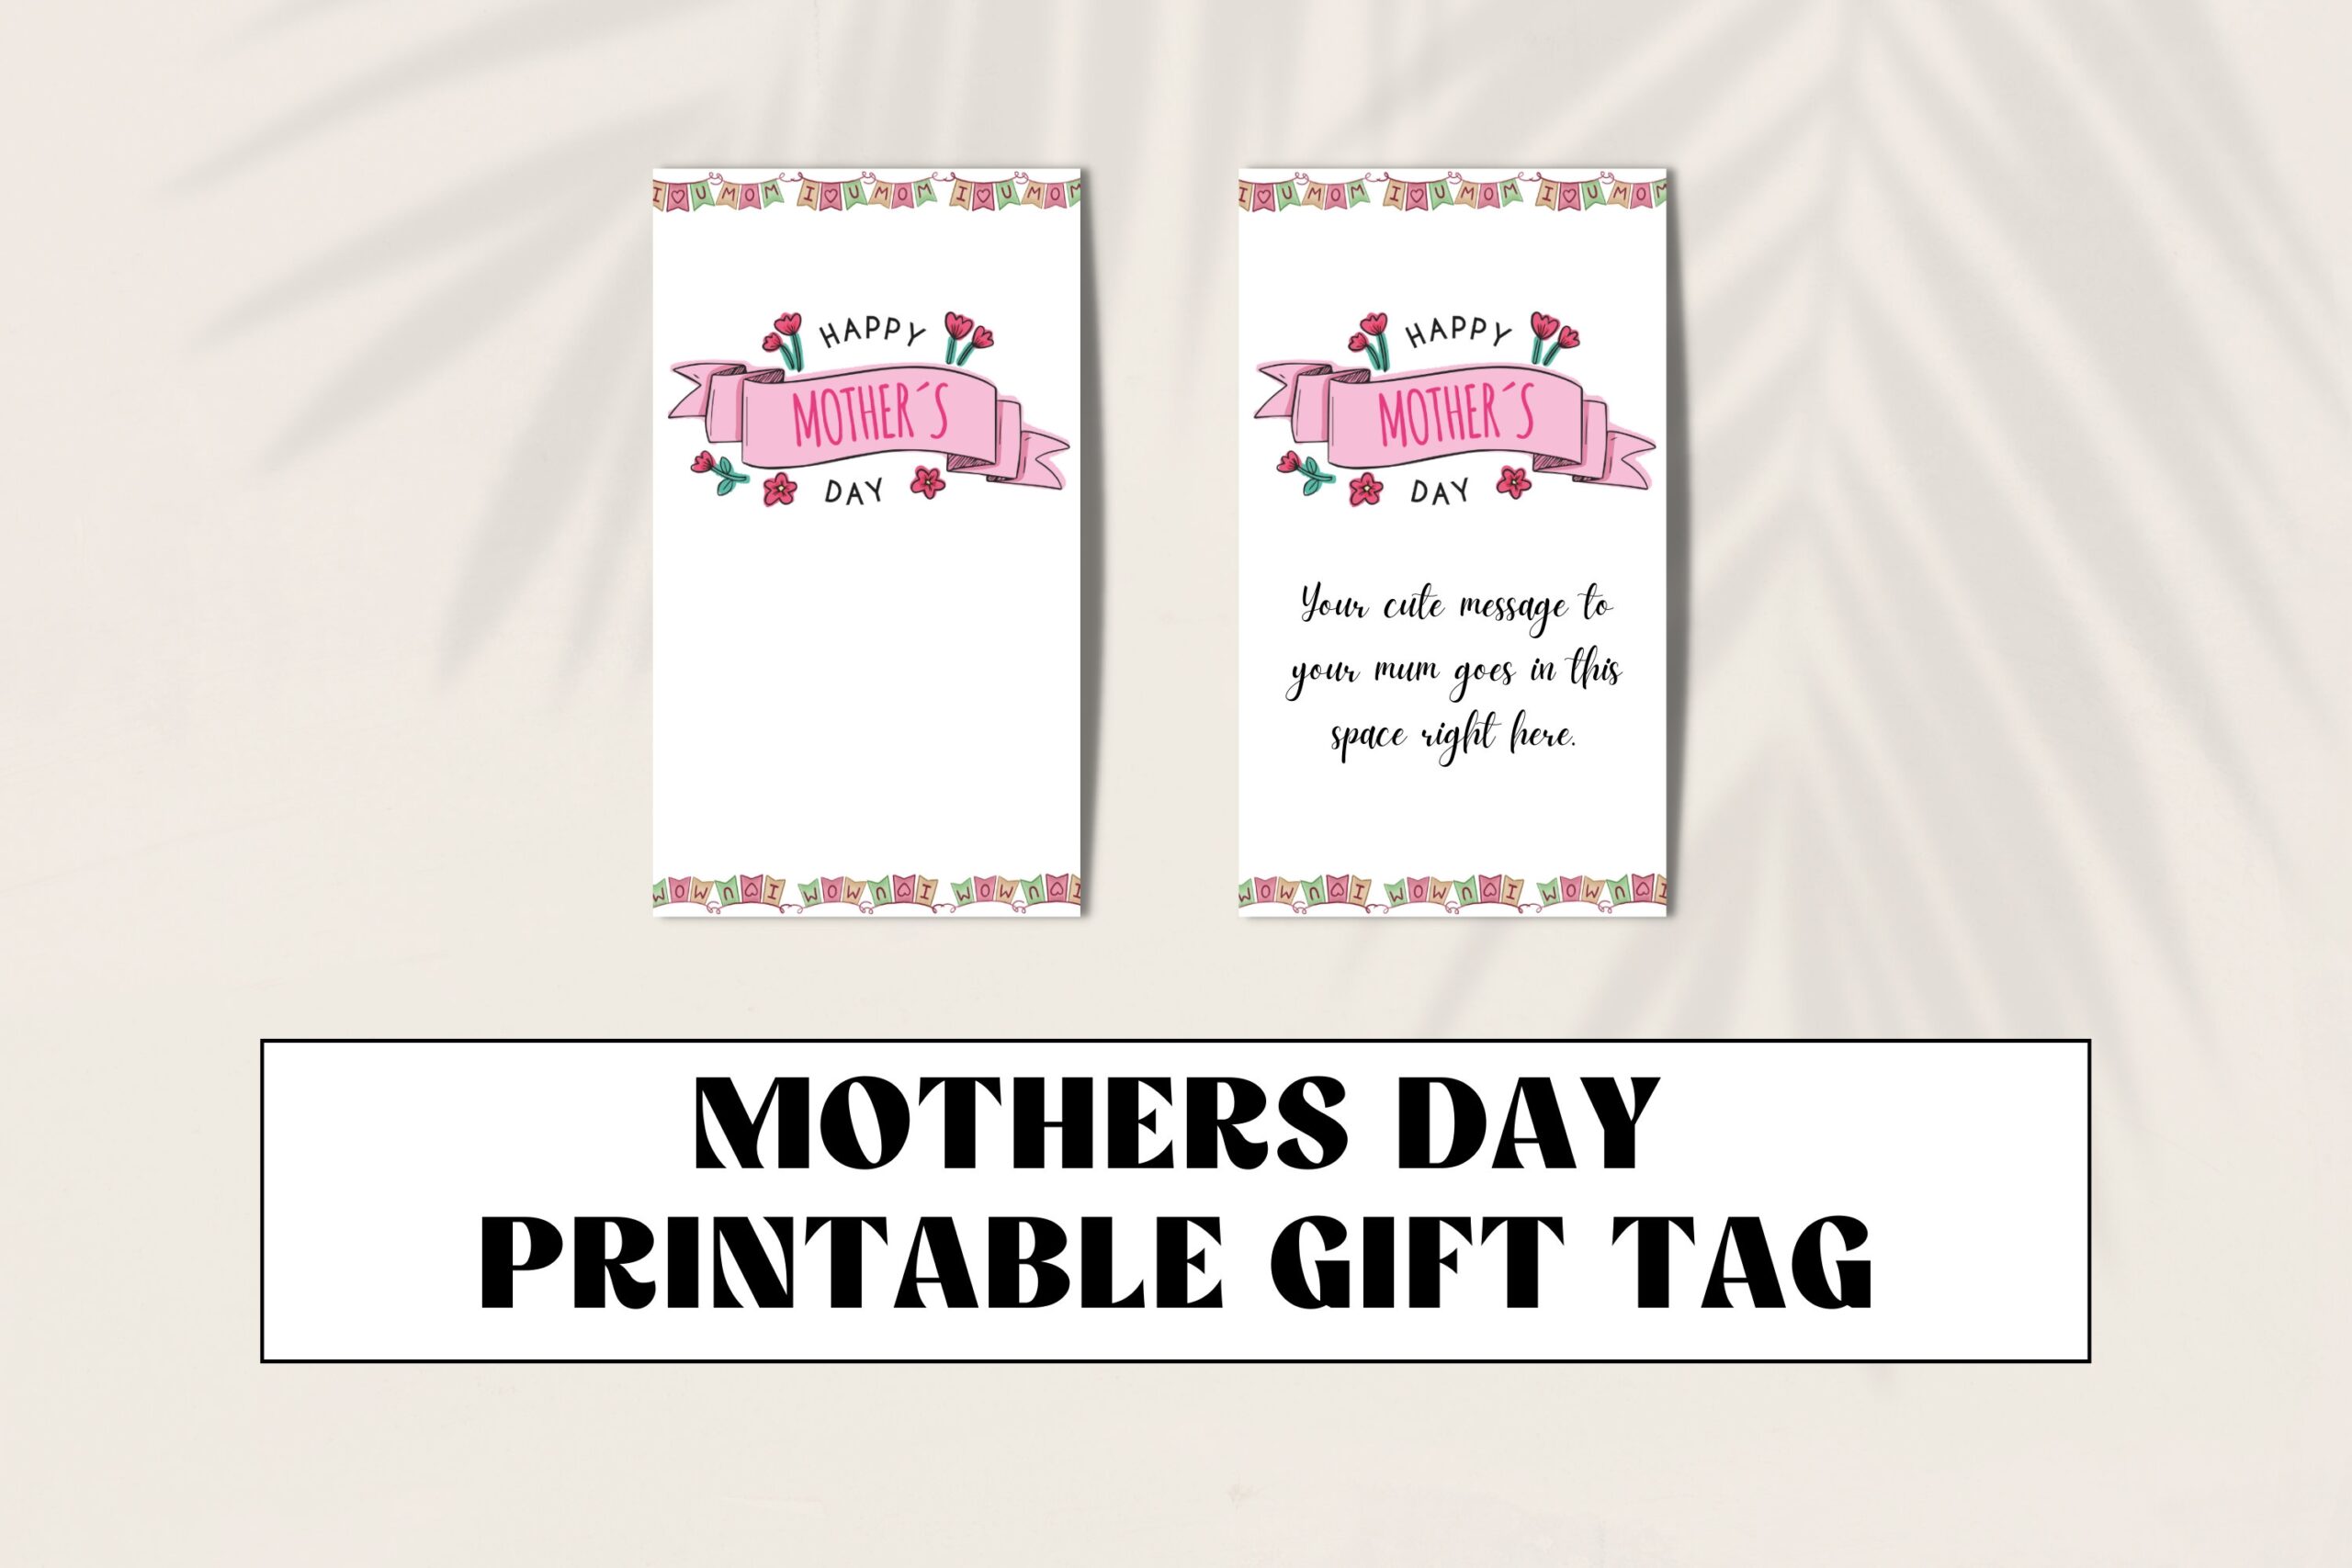 Happy Mothers Day Gift Tags Printable Mothers Day Gift Tag Happy Mothers Day Gift Tags Printable Mother s Day Gift Tag Printable Etsy